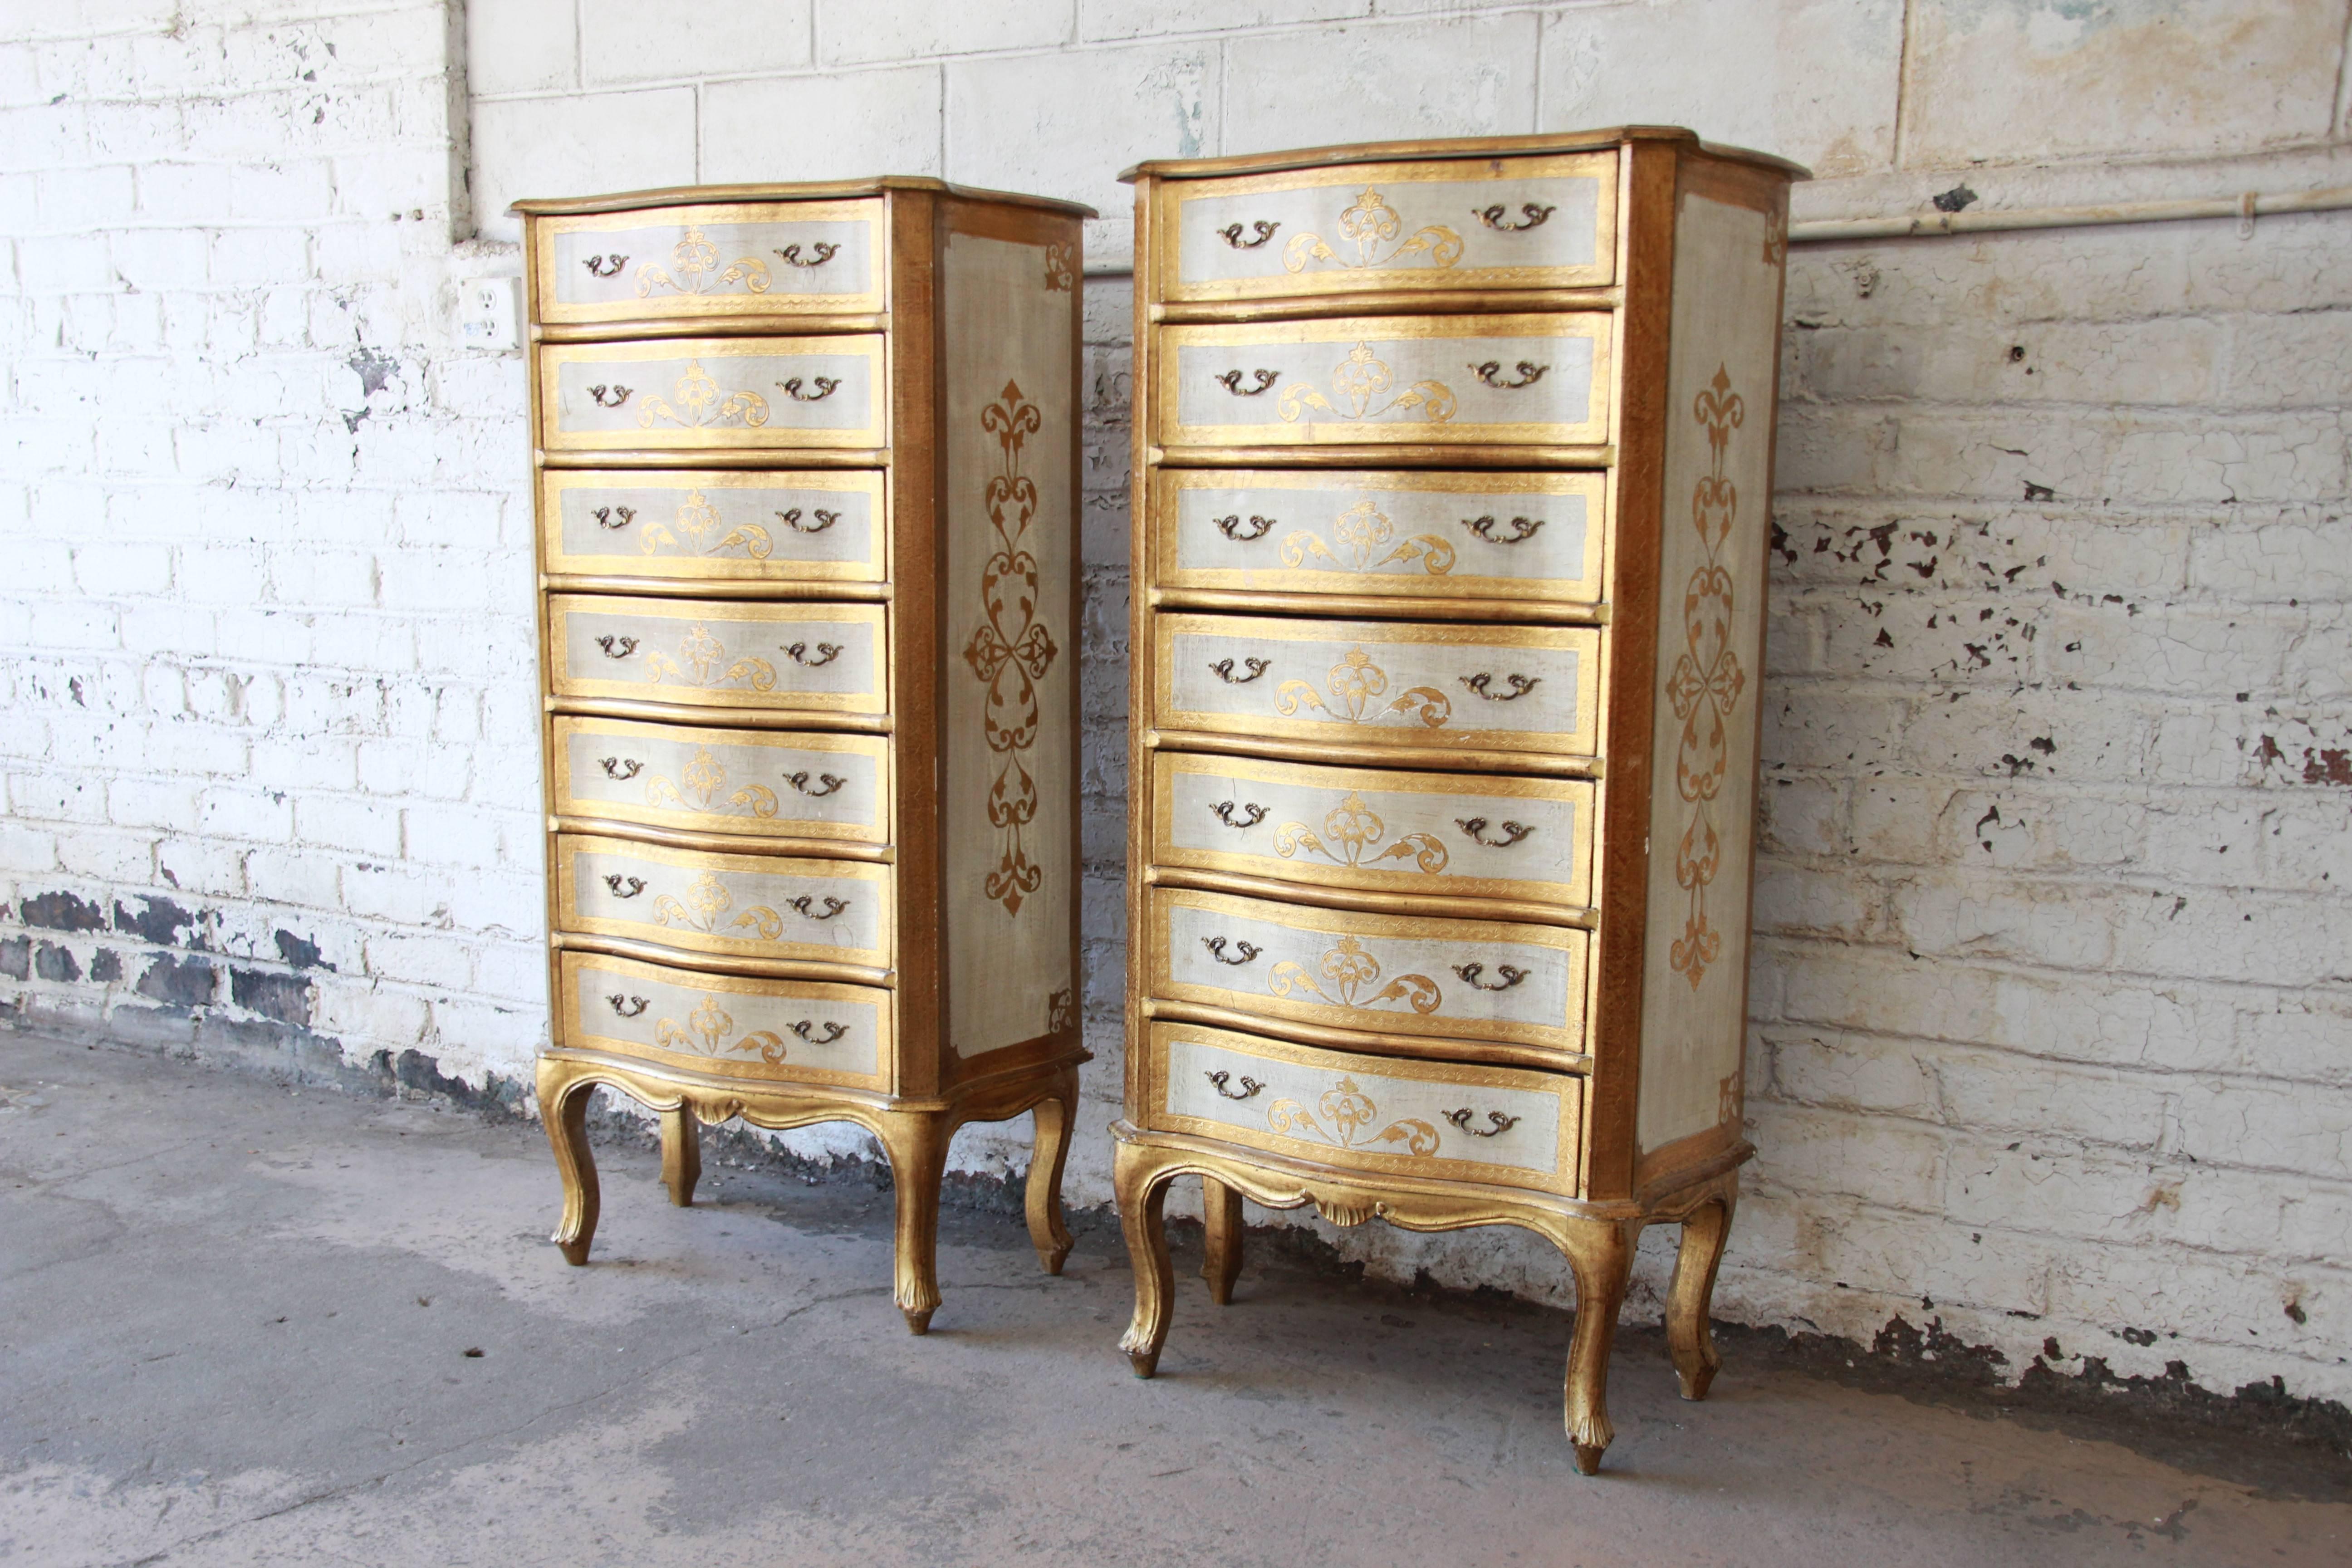 A gorgeous pair of 1940s Italian Florentine gold gilt and cream lingerie chests or semainiers. The chests feature stunning carved details and great storage, each with seven drawers. They are sturdy and well made. There is some patina and wear to